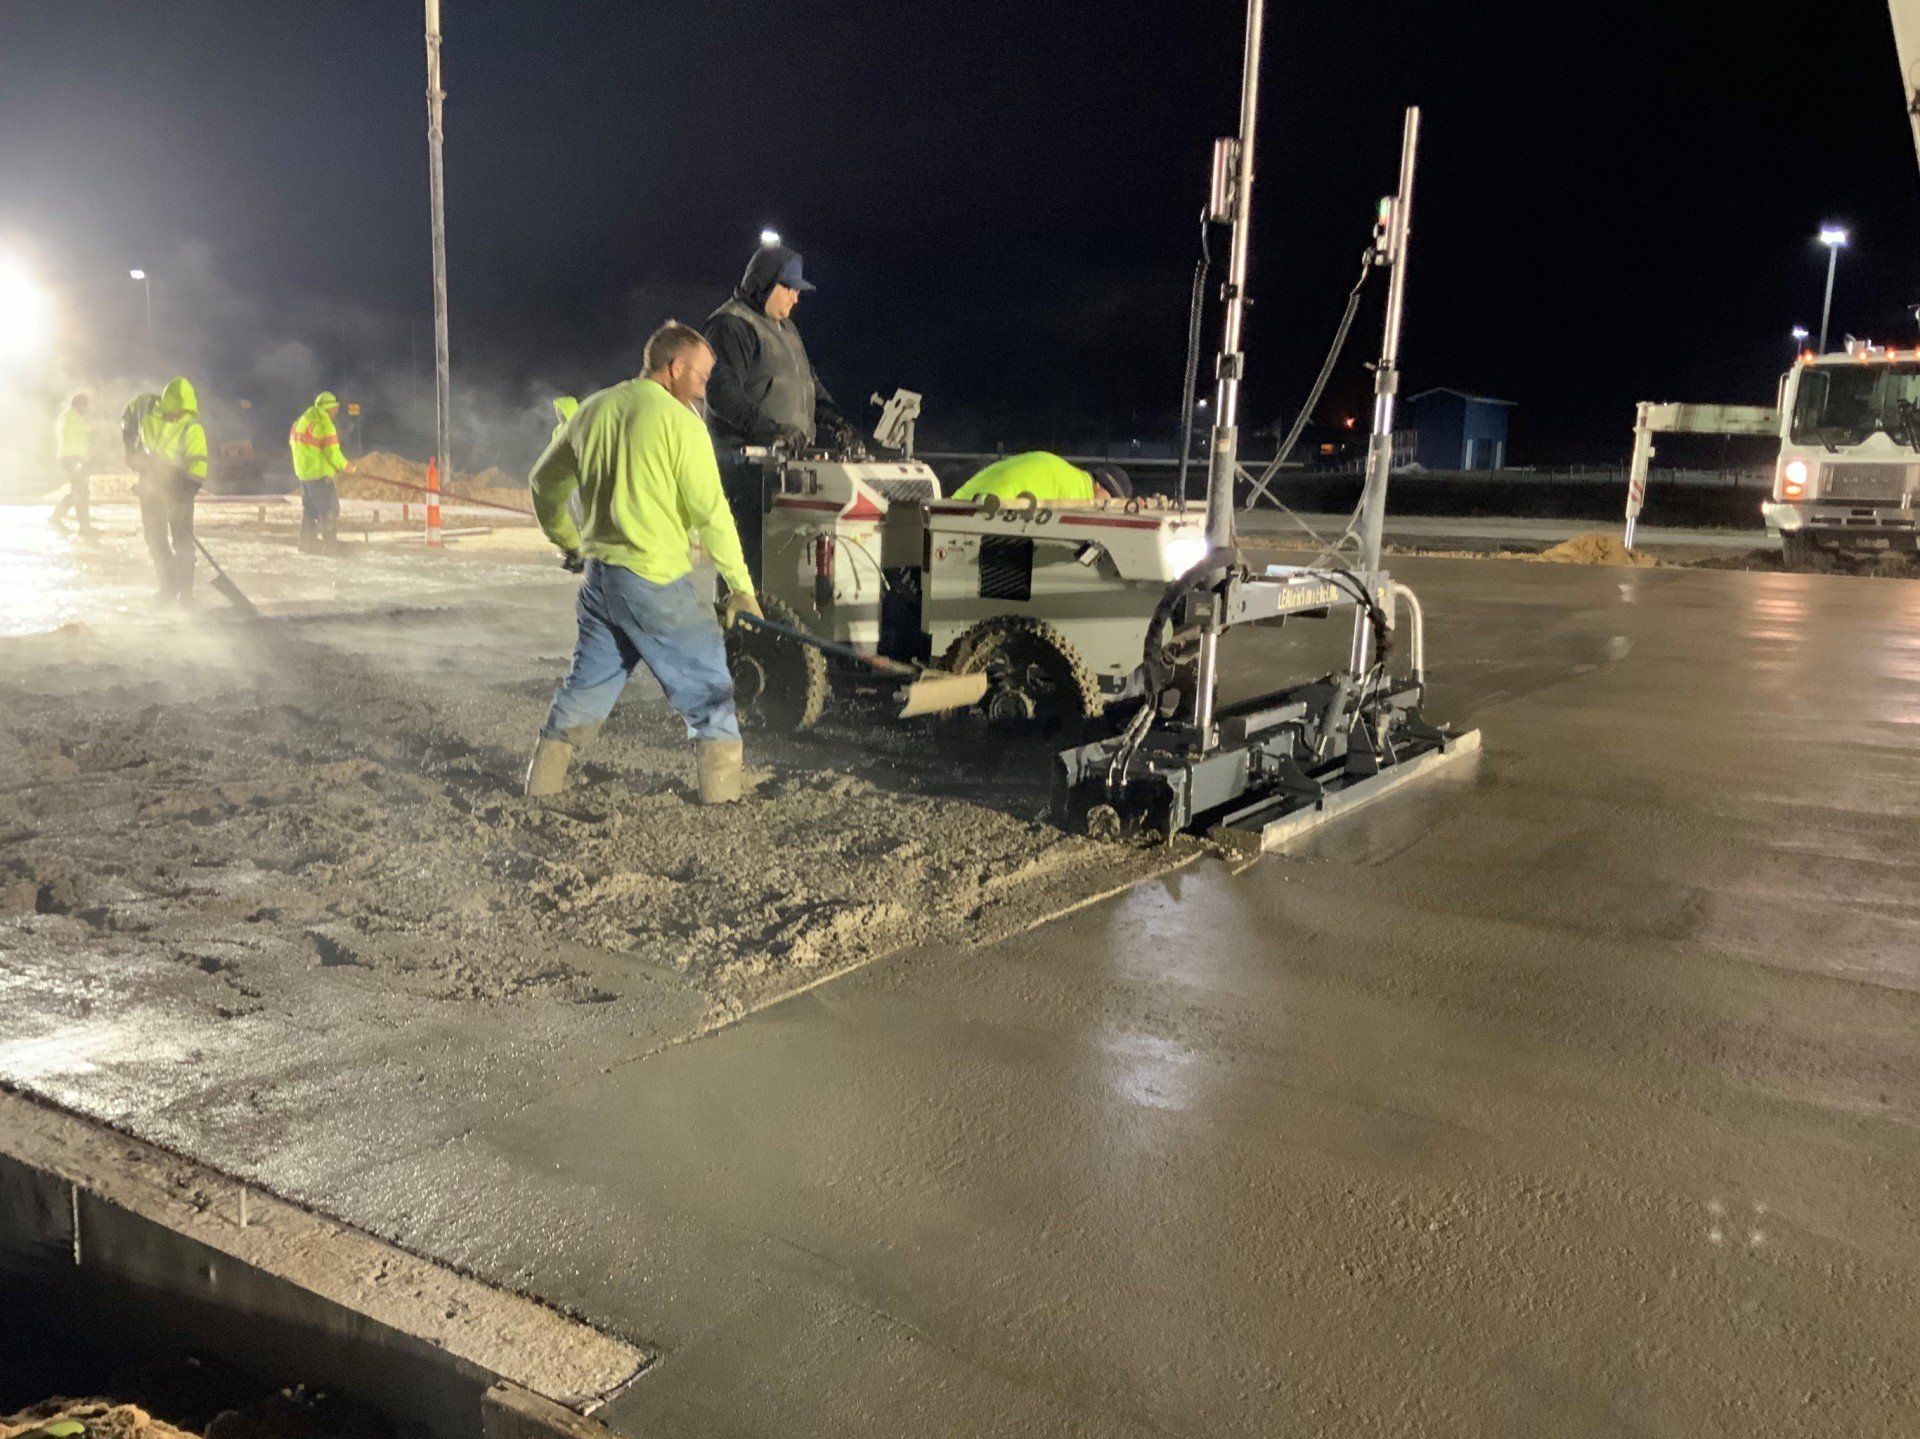 A group of construction workers are working on a concrete floor at night.